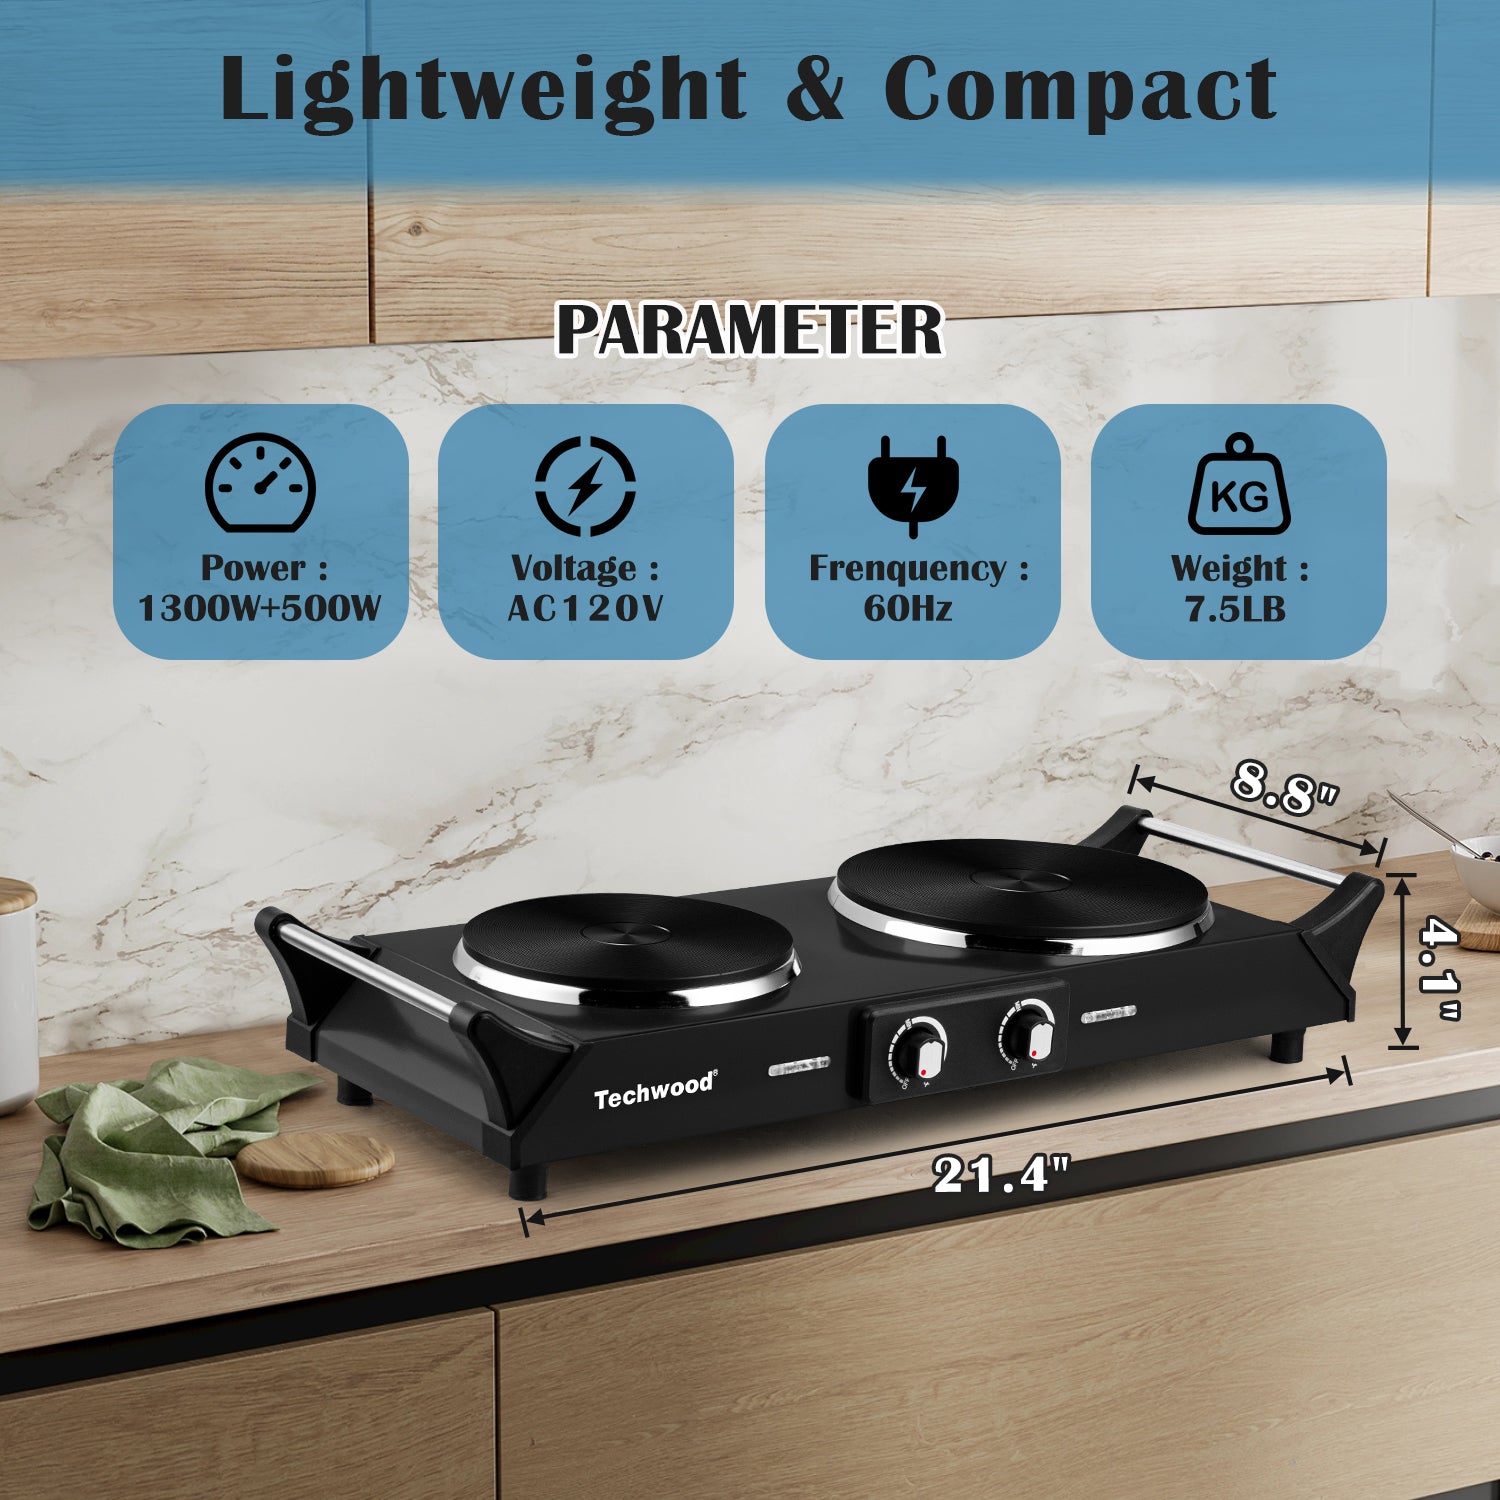 Hot Plate Techwood Doubel Burners for Cooking 1800W Countertop